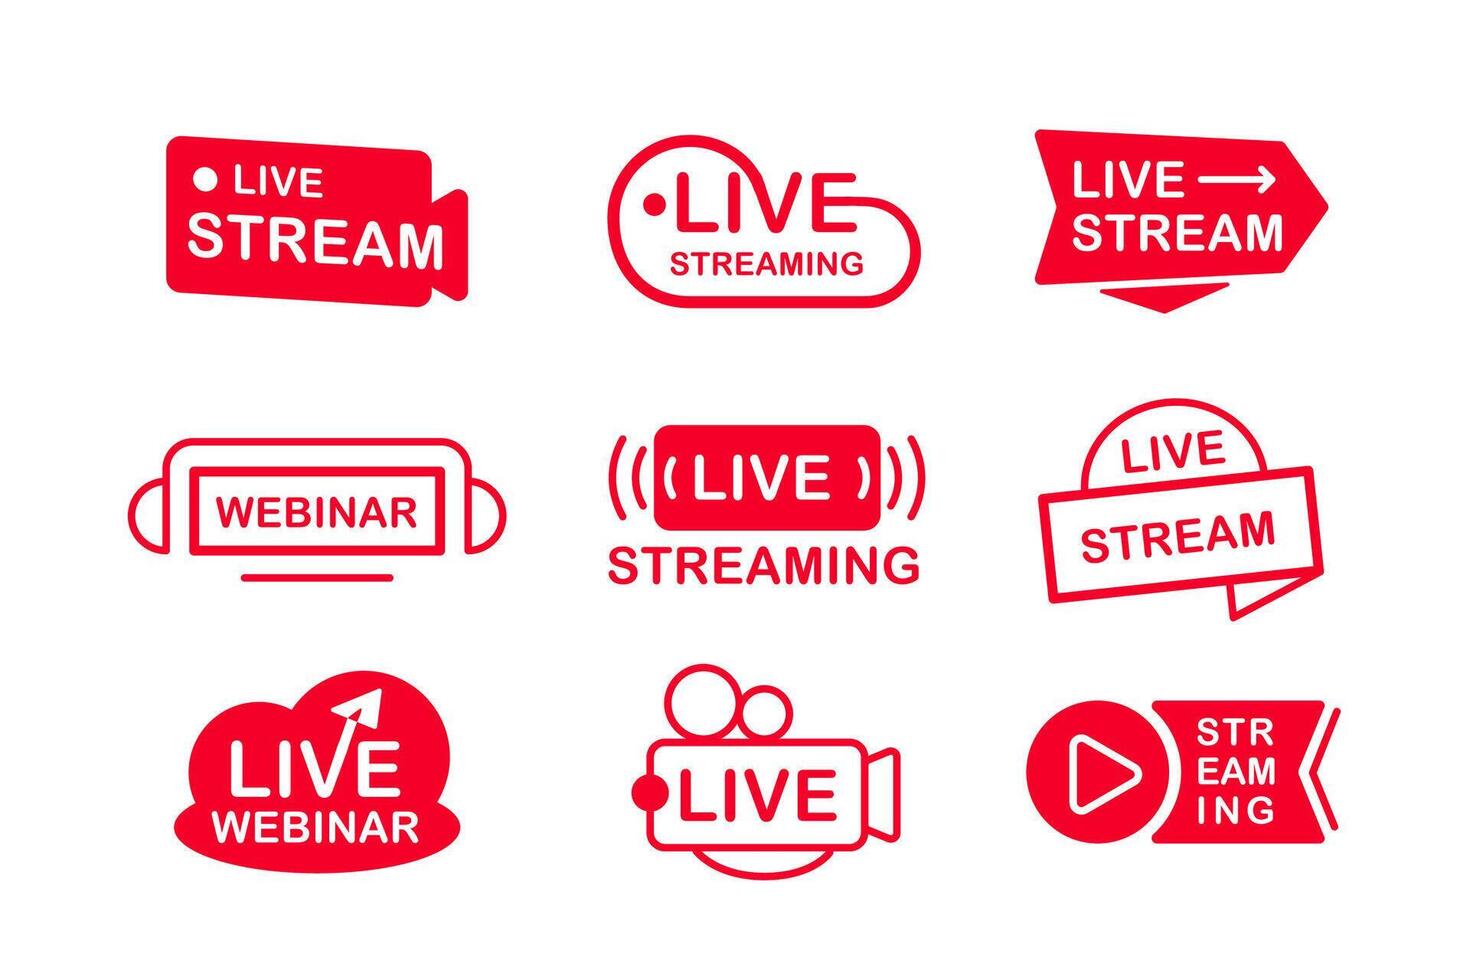 Live stream logo, icon Collection. Live online broadcasting, streaming. Social media vector